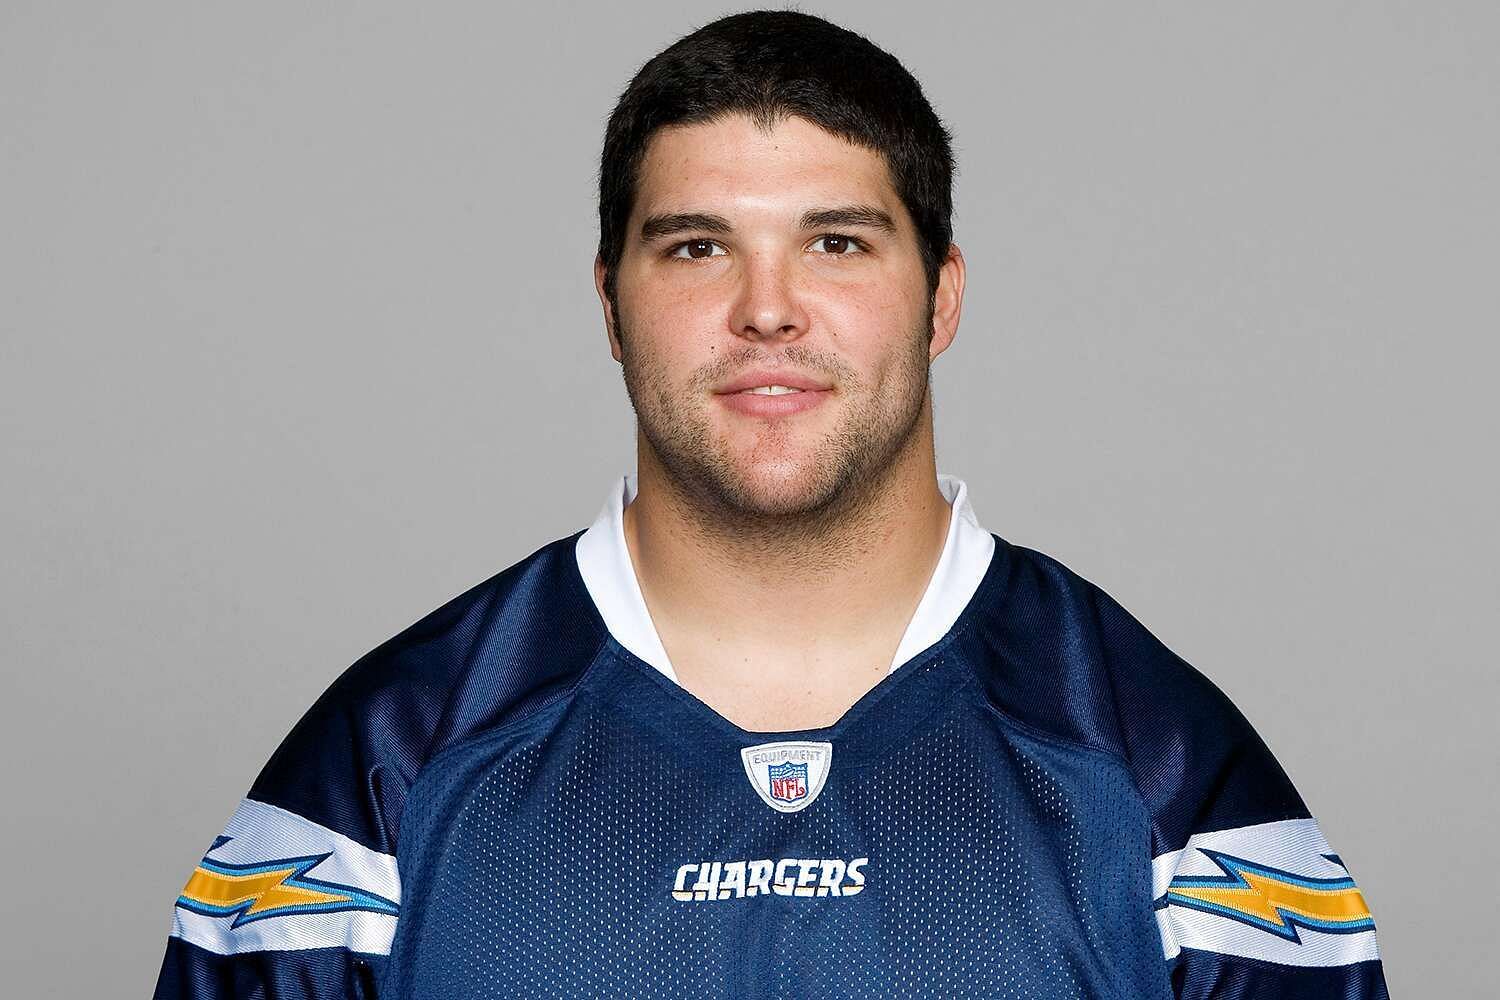 Former Los Angeles Chargers offensive lineman Shane Olivea (Courtesy of people.com)